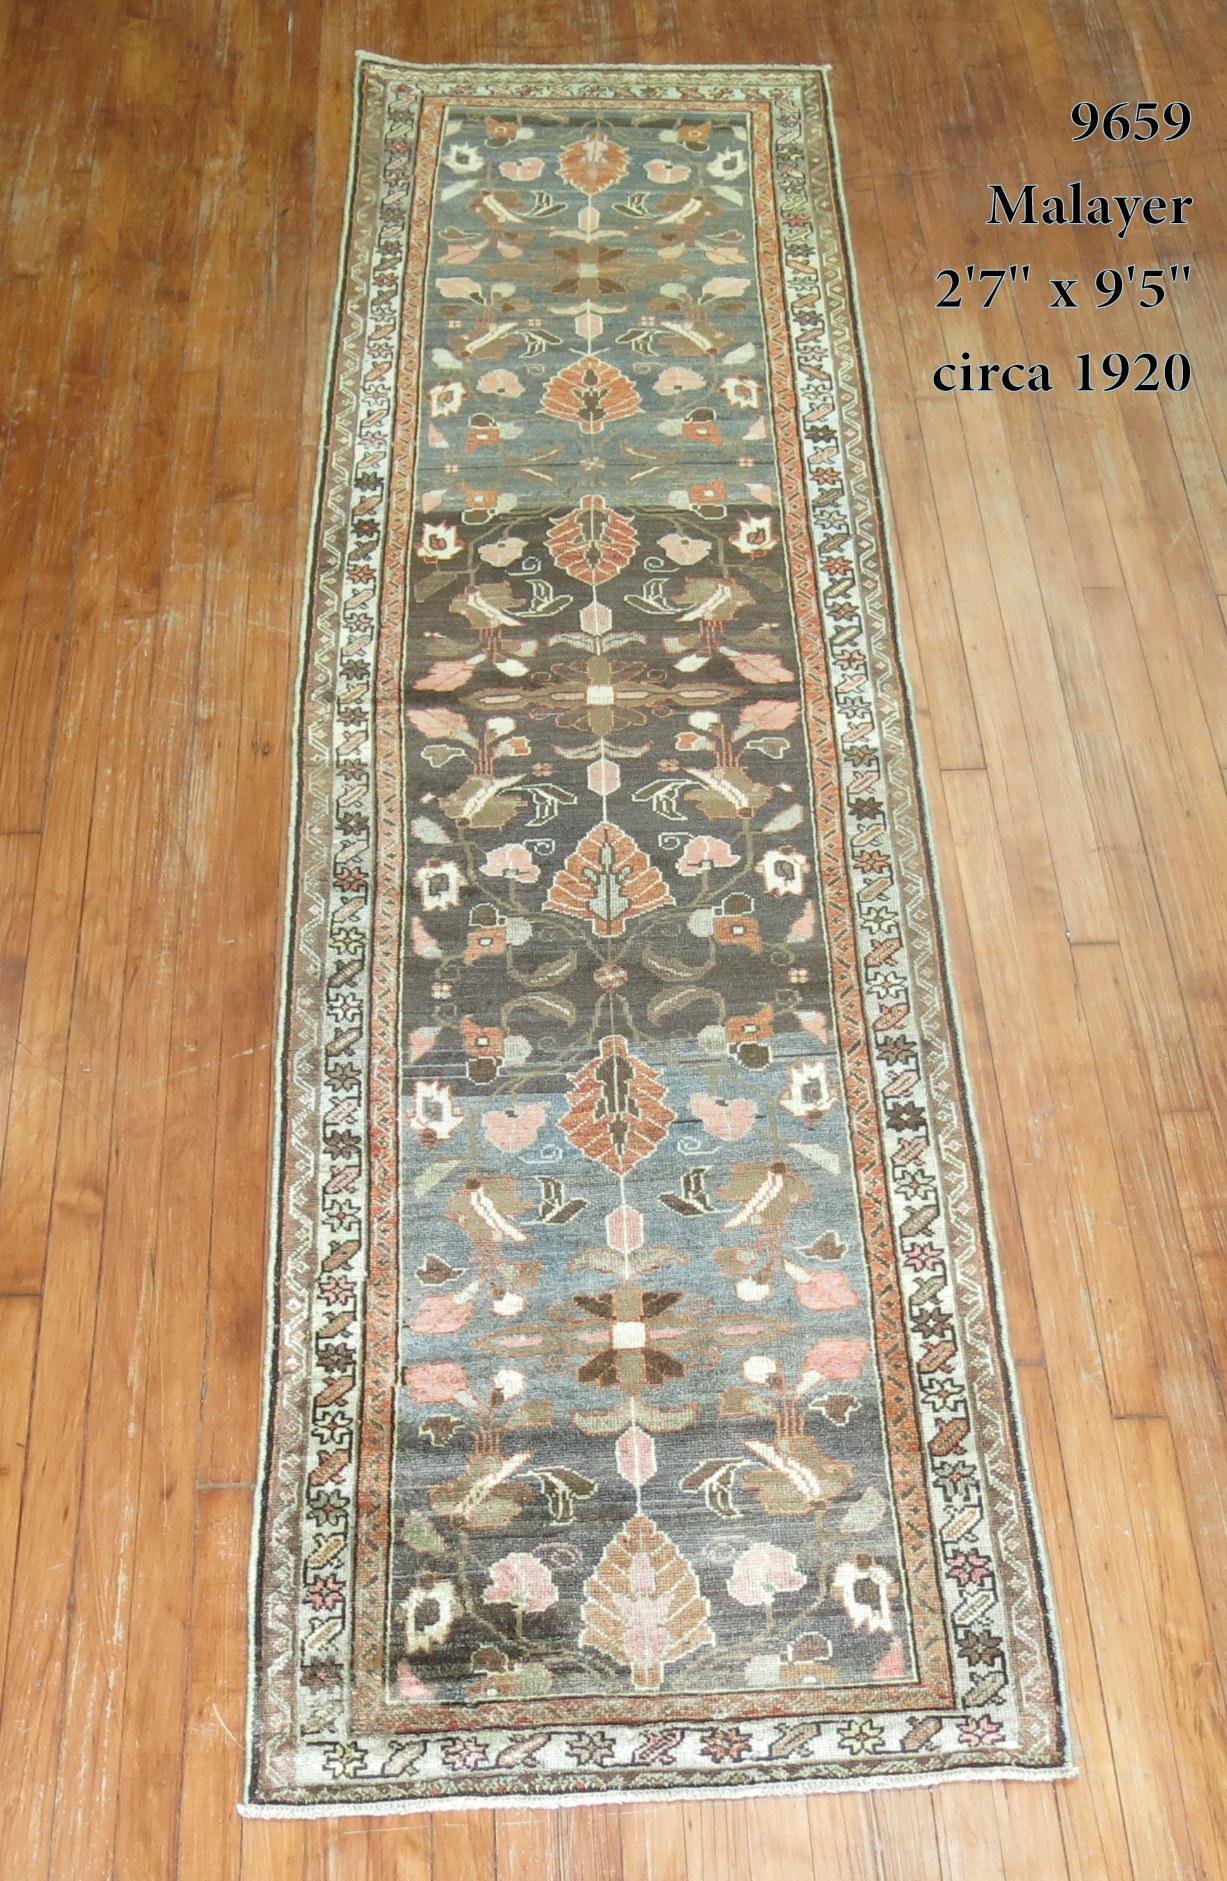 Early 20th century Persian Malayer rug. Predominantly in brown, gray, shades of green.
The color variations in the field are referred to as abrash. Abrash is a term used to describe color variations found in hand knotted Oriental rugs. Although